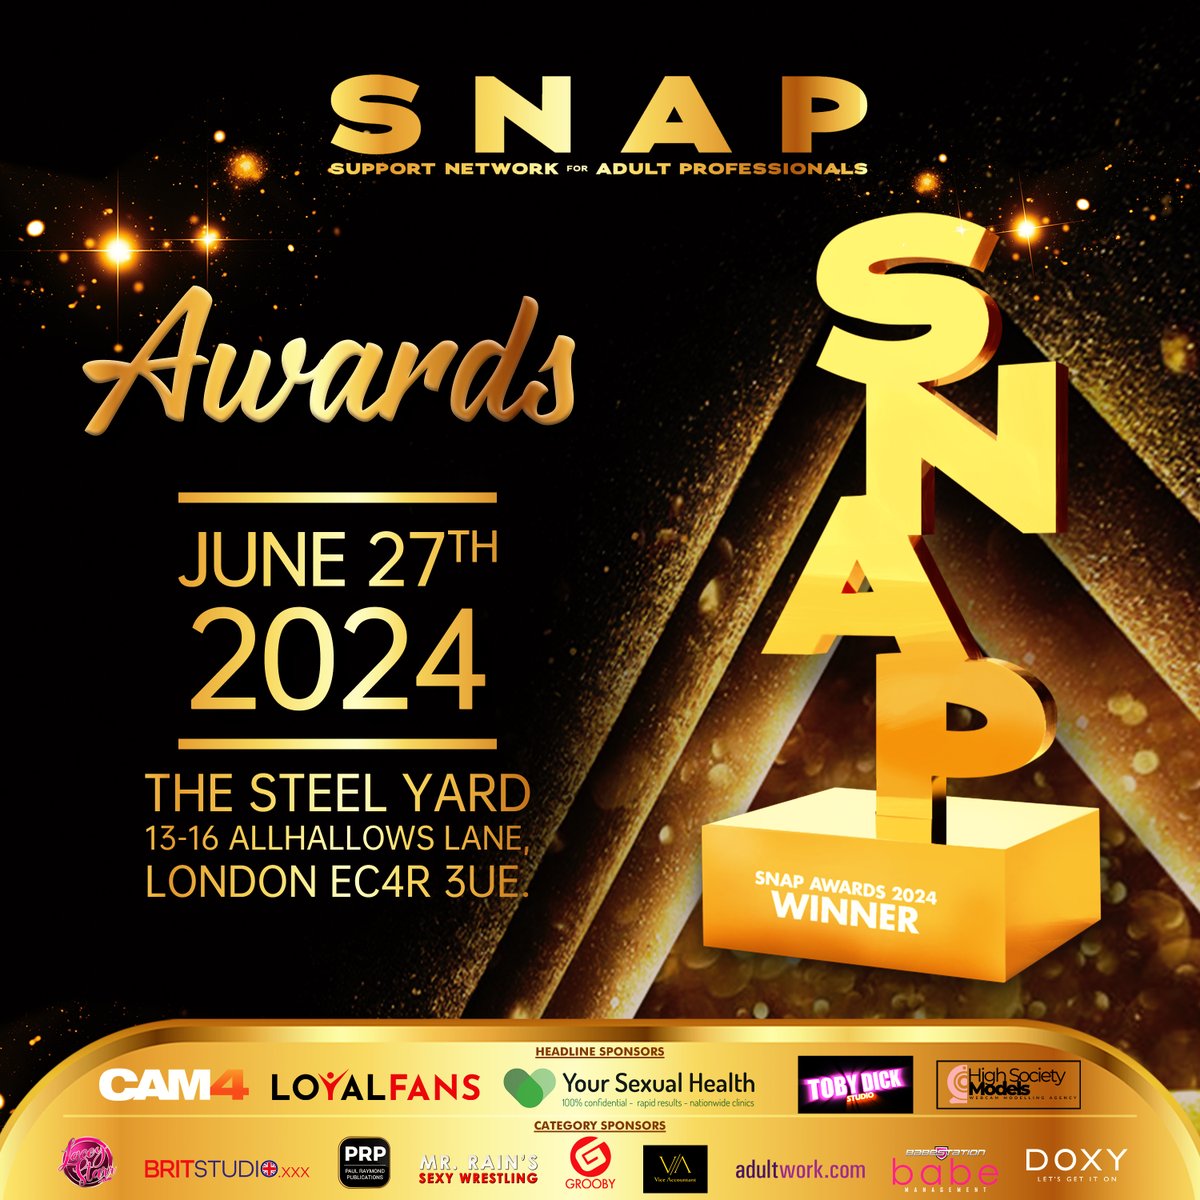 The guestlist for the 2024 SNAP Awards opens tomorrow at 10am. The venue capacity is 1100, so we are offering SNAP members who wish to attend, 7 days priority reservation. Non members are welcome apply from April 15th. You can apply for SNAP membership at snaptogether.co.uk